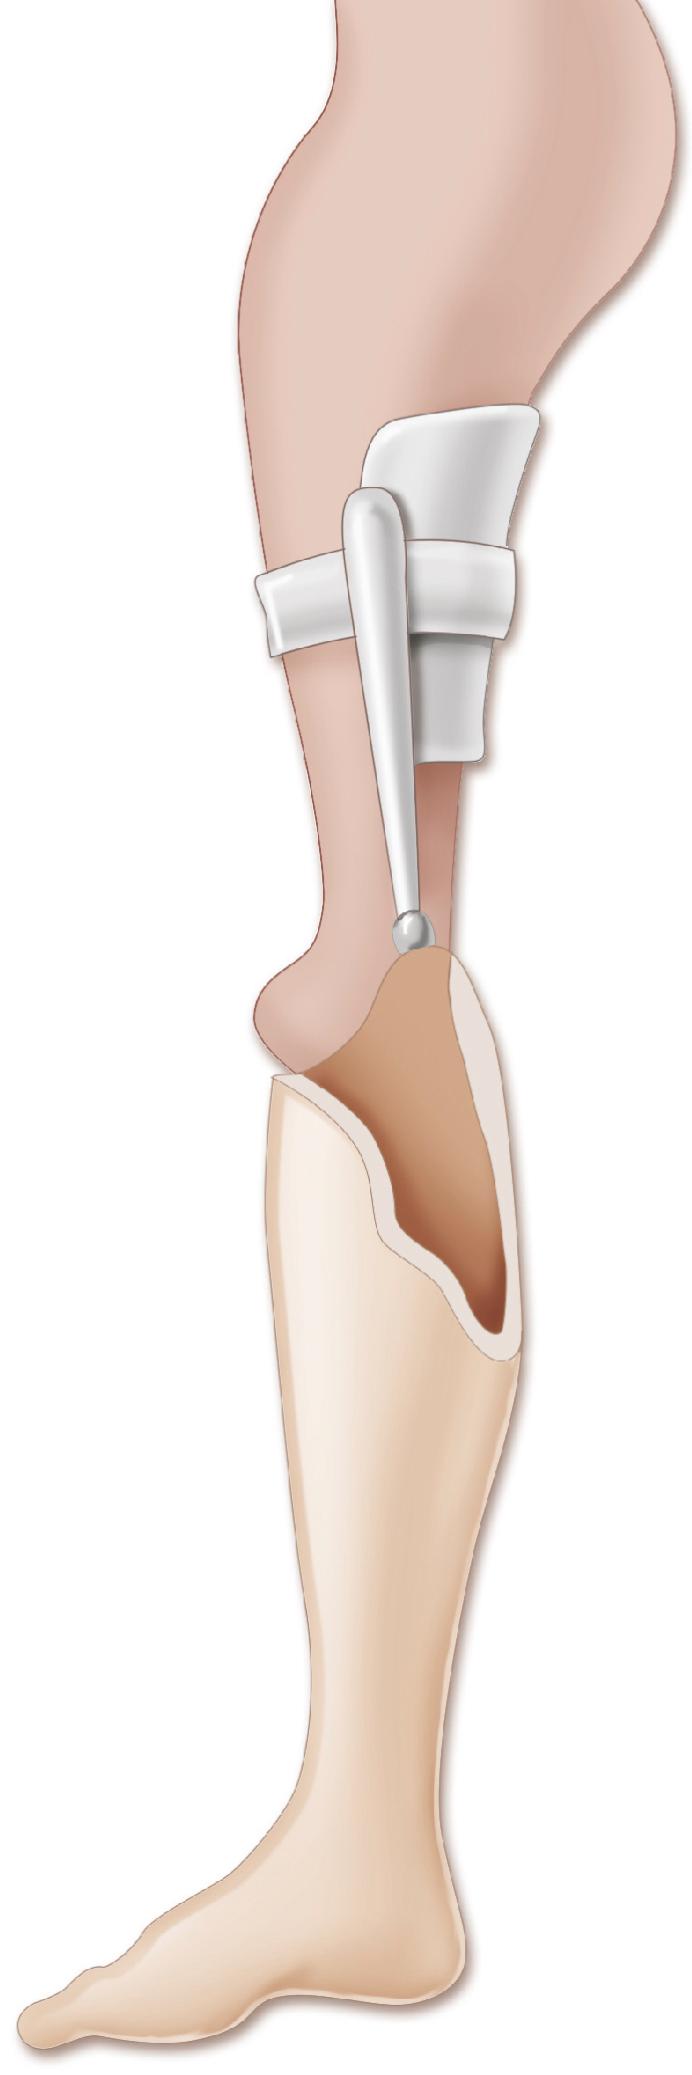 Fig. 21.22, Rotationplasty for proximal focal femoral deficiency. The ankle and foot are turned 180 degrees to activate the knee of the prosthesis.